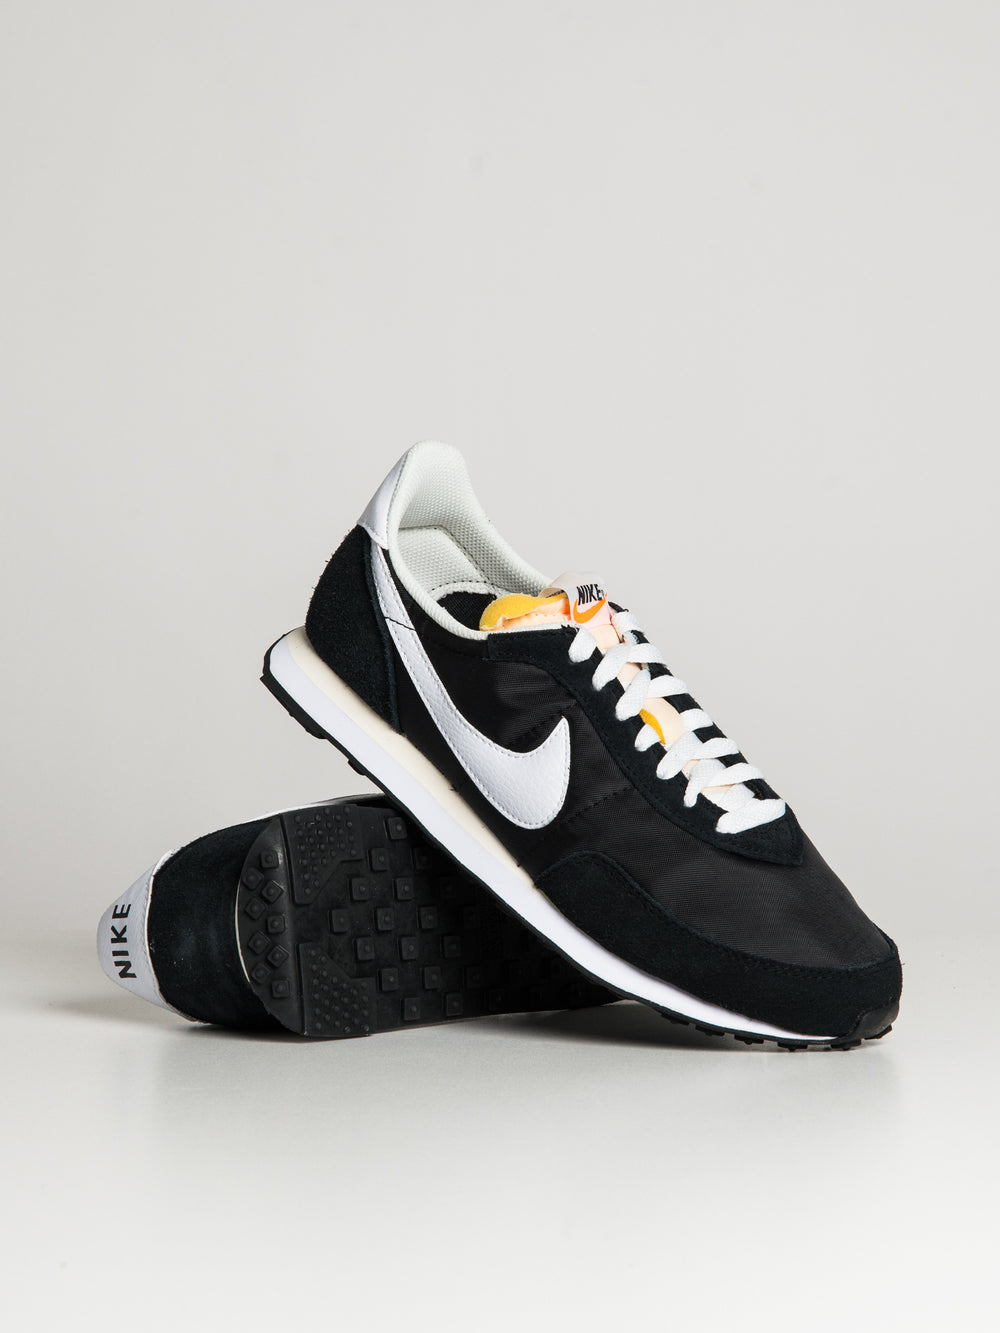 MENS NIKE WAFFLE TRAINER 2 SNEAKERS - CLEARANCE